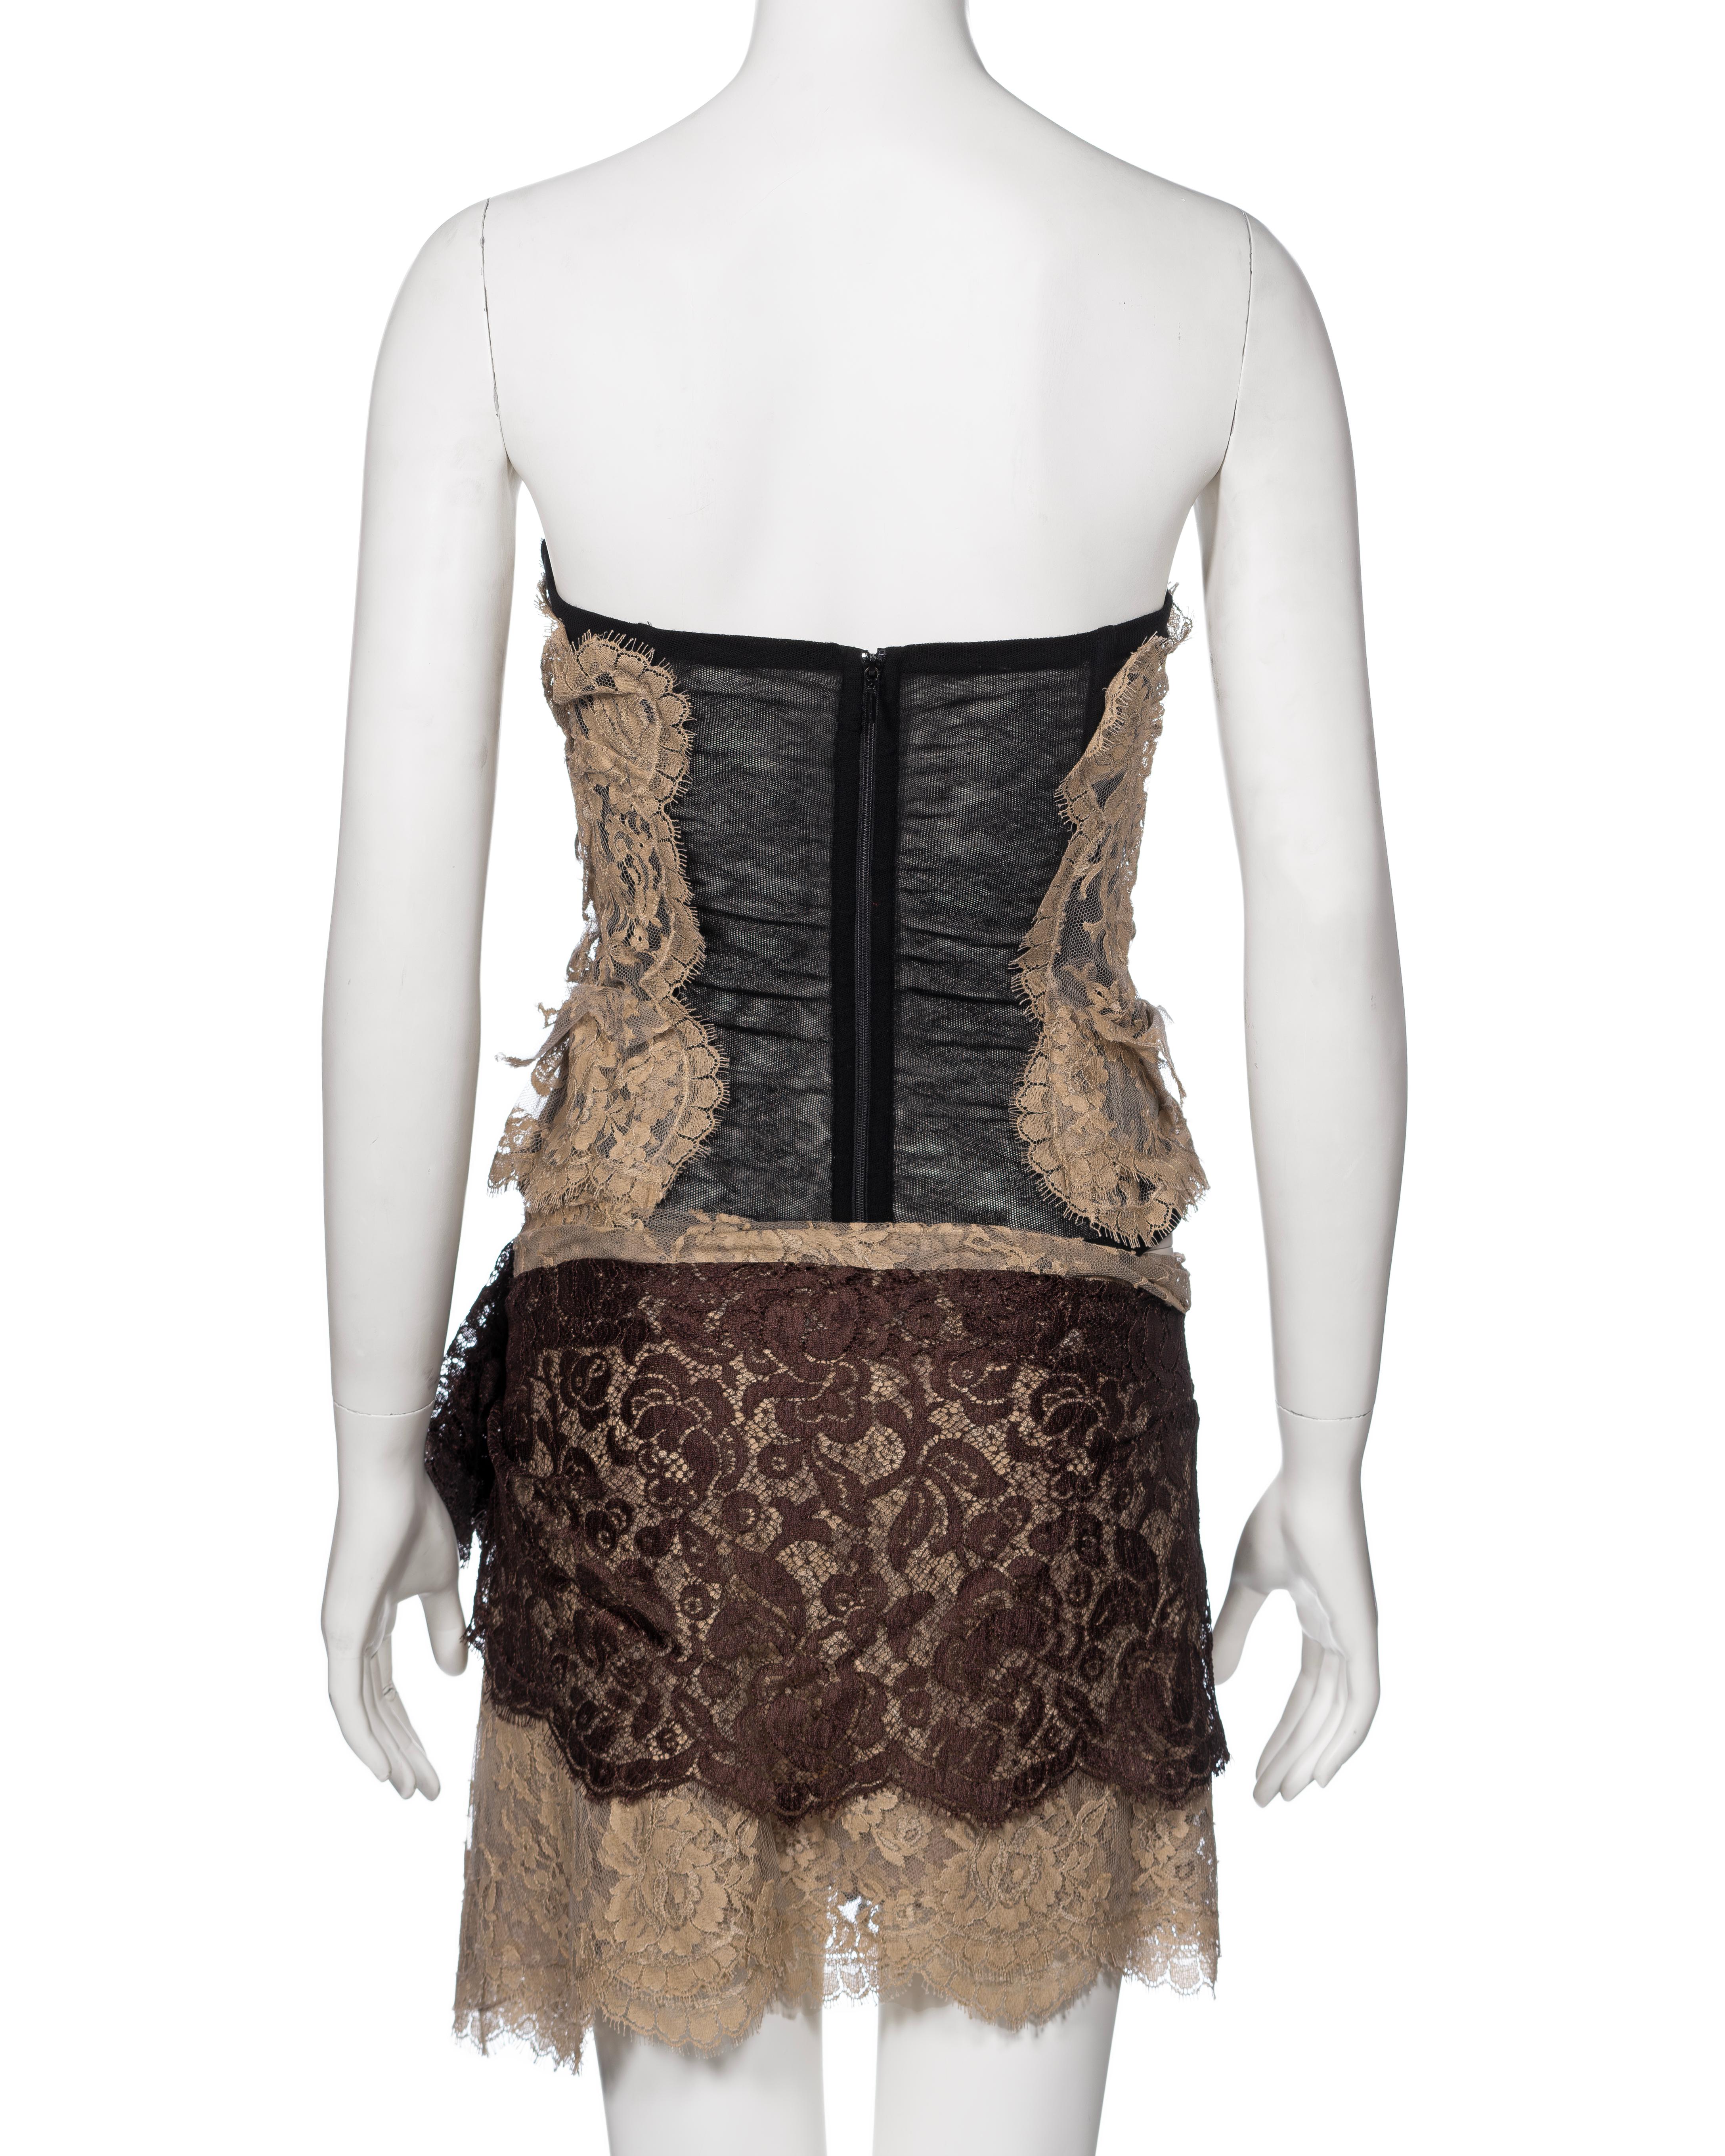 Dolce & Gabbana Cream and Brown Lace Corset and Mini Skirt Set, SS 2005 For Sale 6